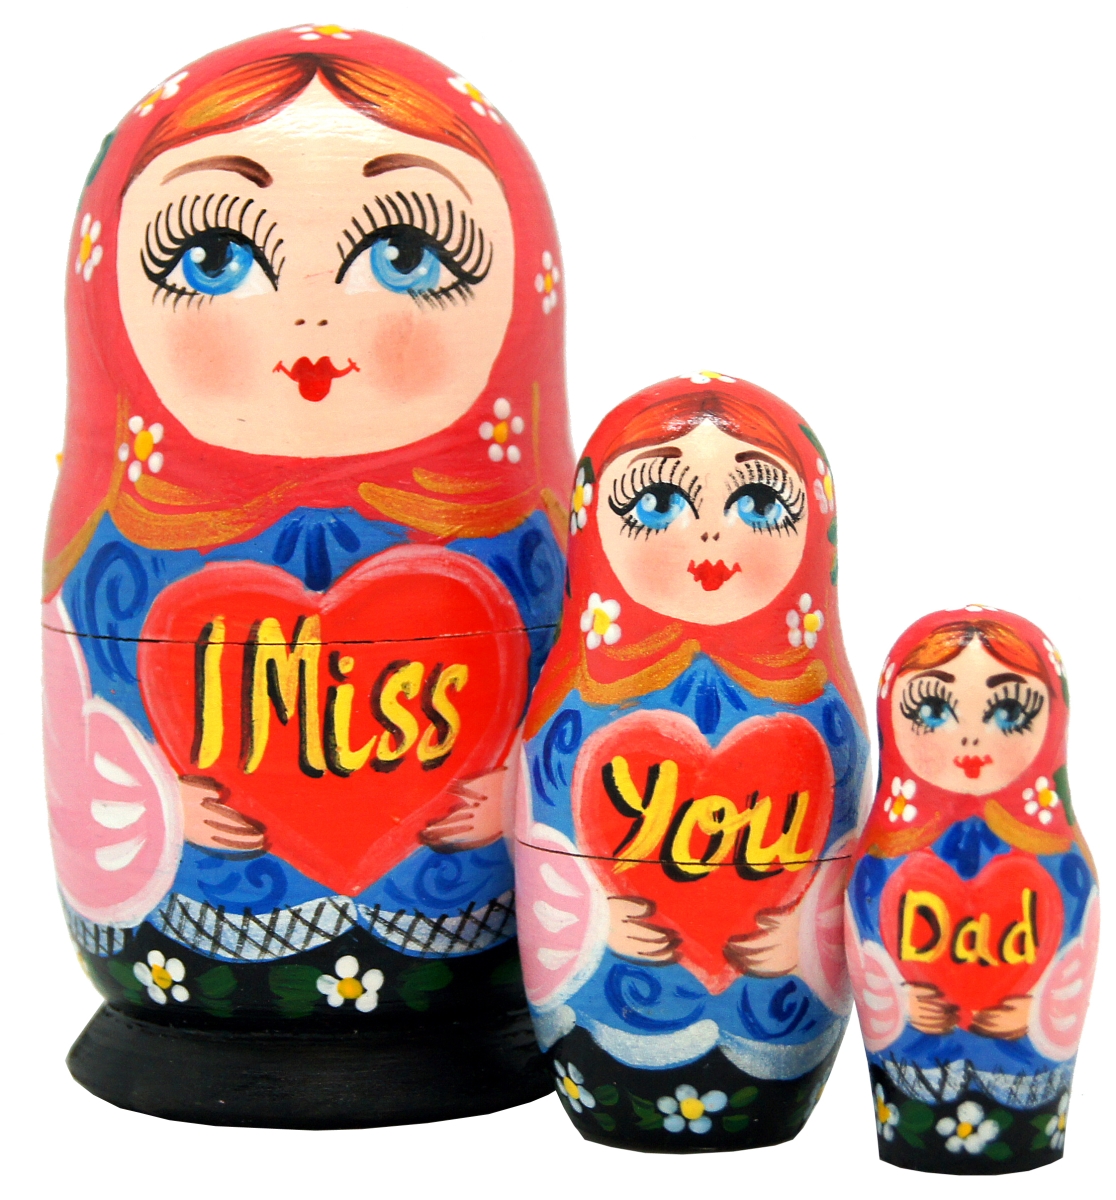 Picture of G.DeBrekht 14705 Russian Matryoshka Wooden Stacking I Miss You Dad 3 Nest Doll